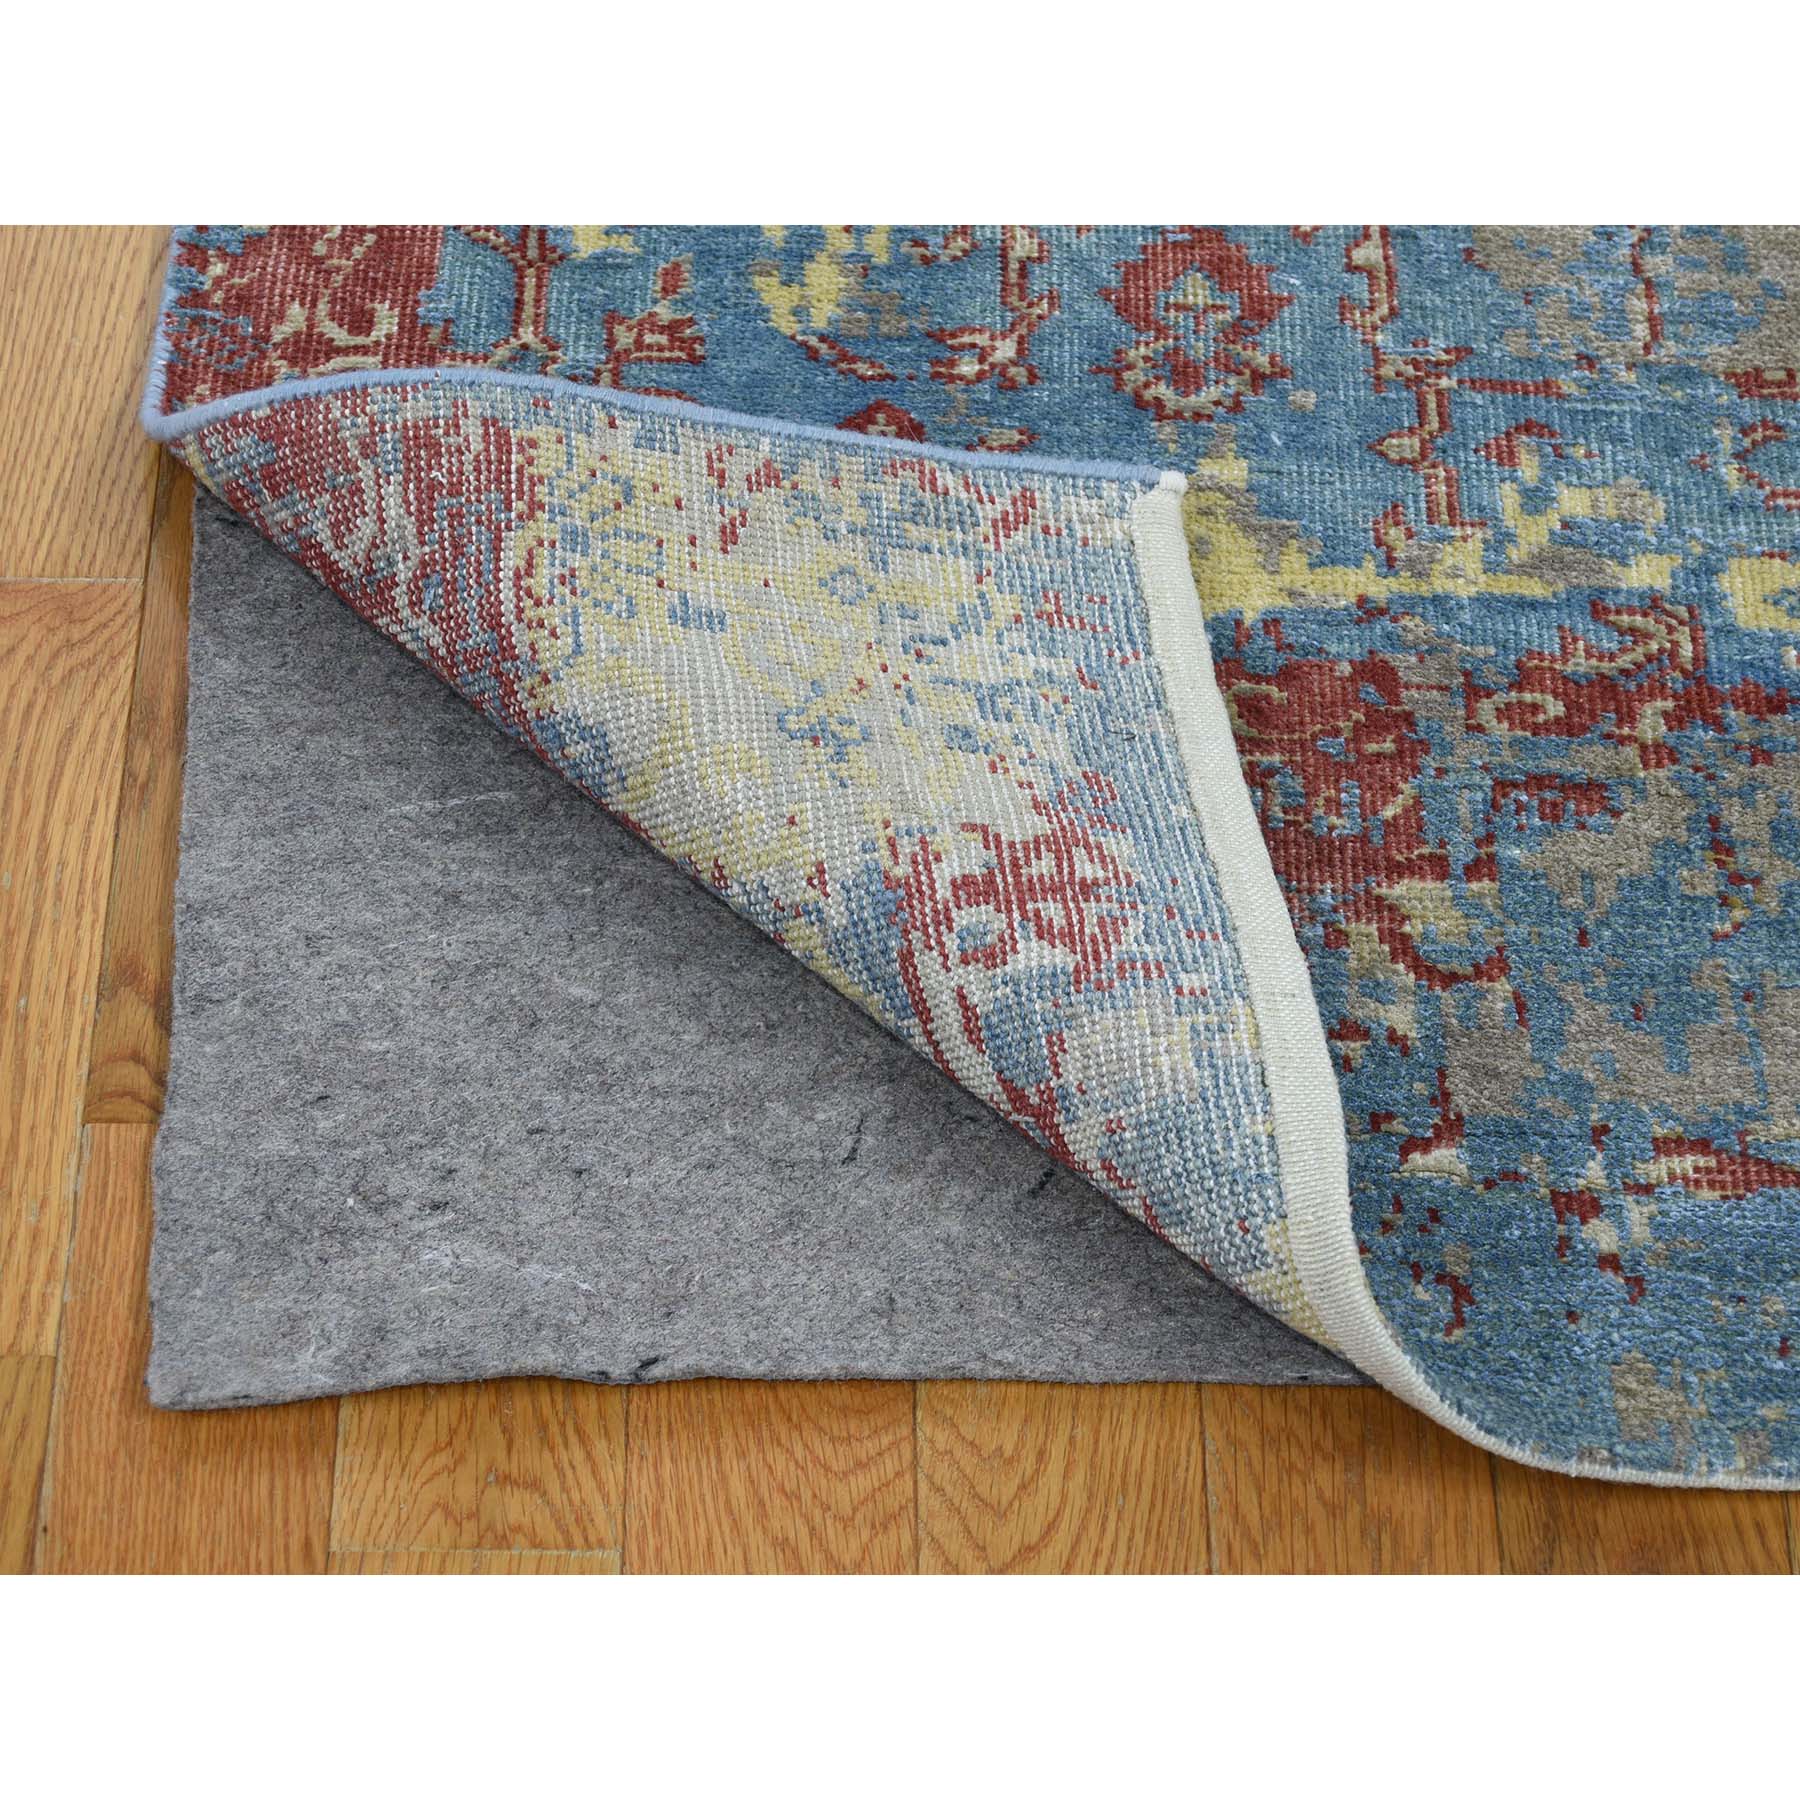 2-5 x6-1  Hand-Knotted Silk With Oxidized Wool Broken Design Runner Rug 